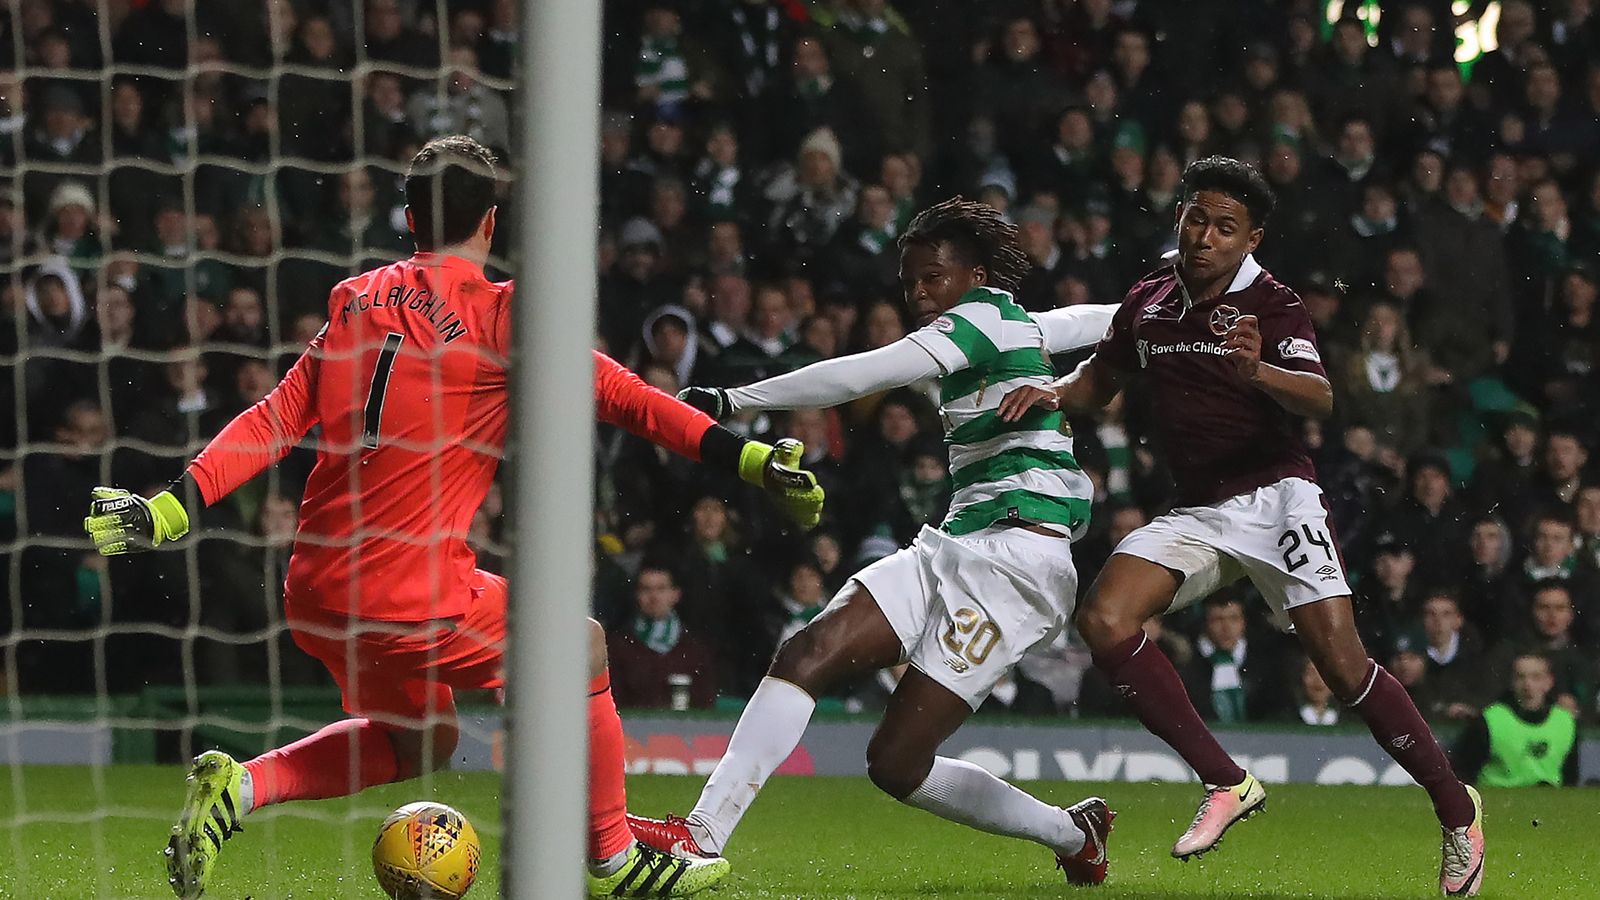 Celtic 3 - 1 Hearts - Match Report & Highlights